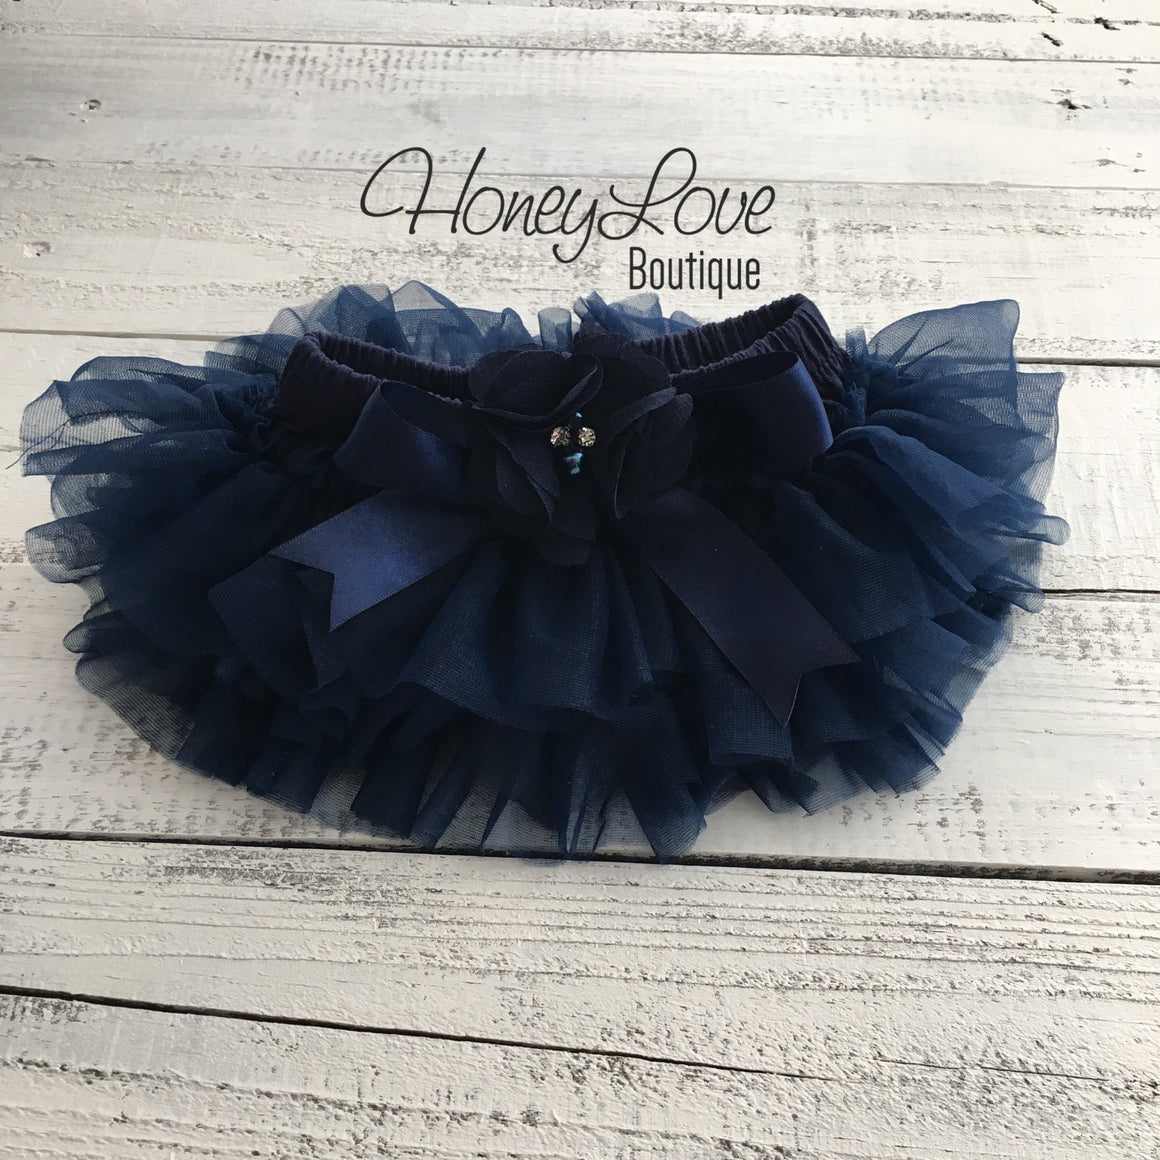 PERSONALIZED Name inside Heart - Gold glitter and Navy Blue - embellished tutu skirt bloomers - HoneyLoveBoutique